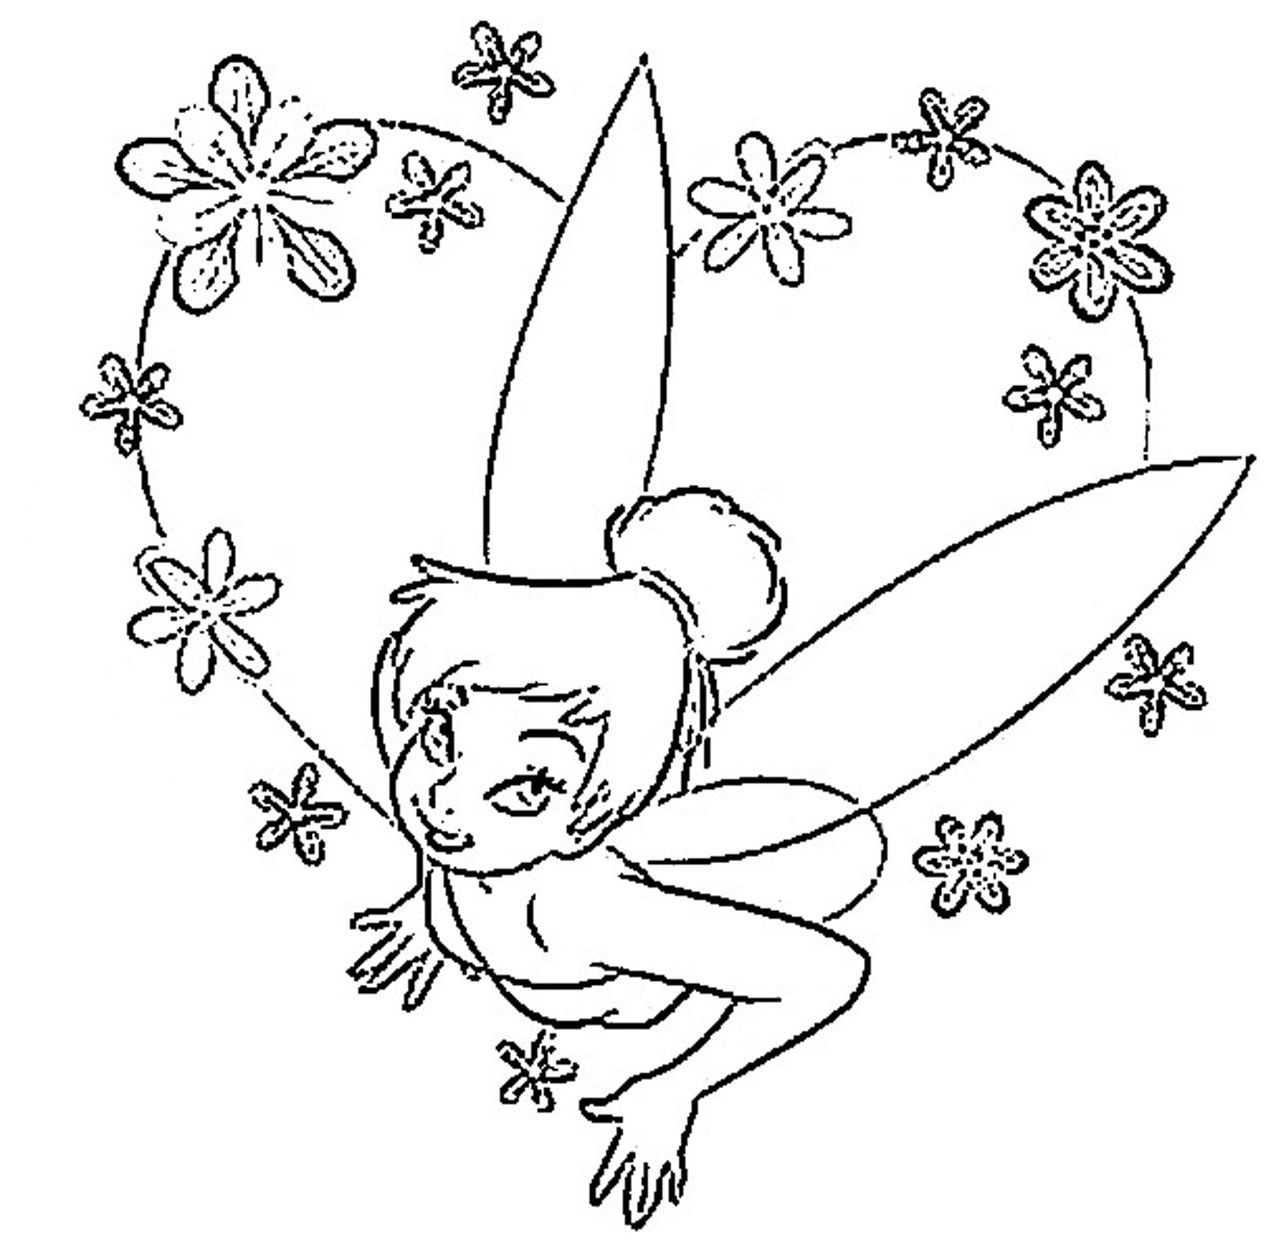 8 Pics of Disney Princess Tinkerbell Coloring Pages - Disney ...